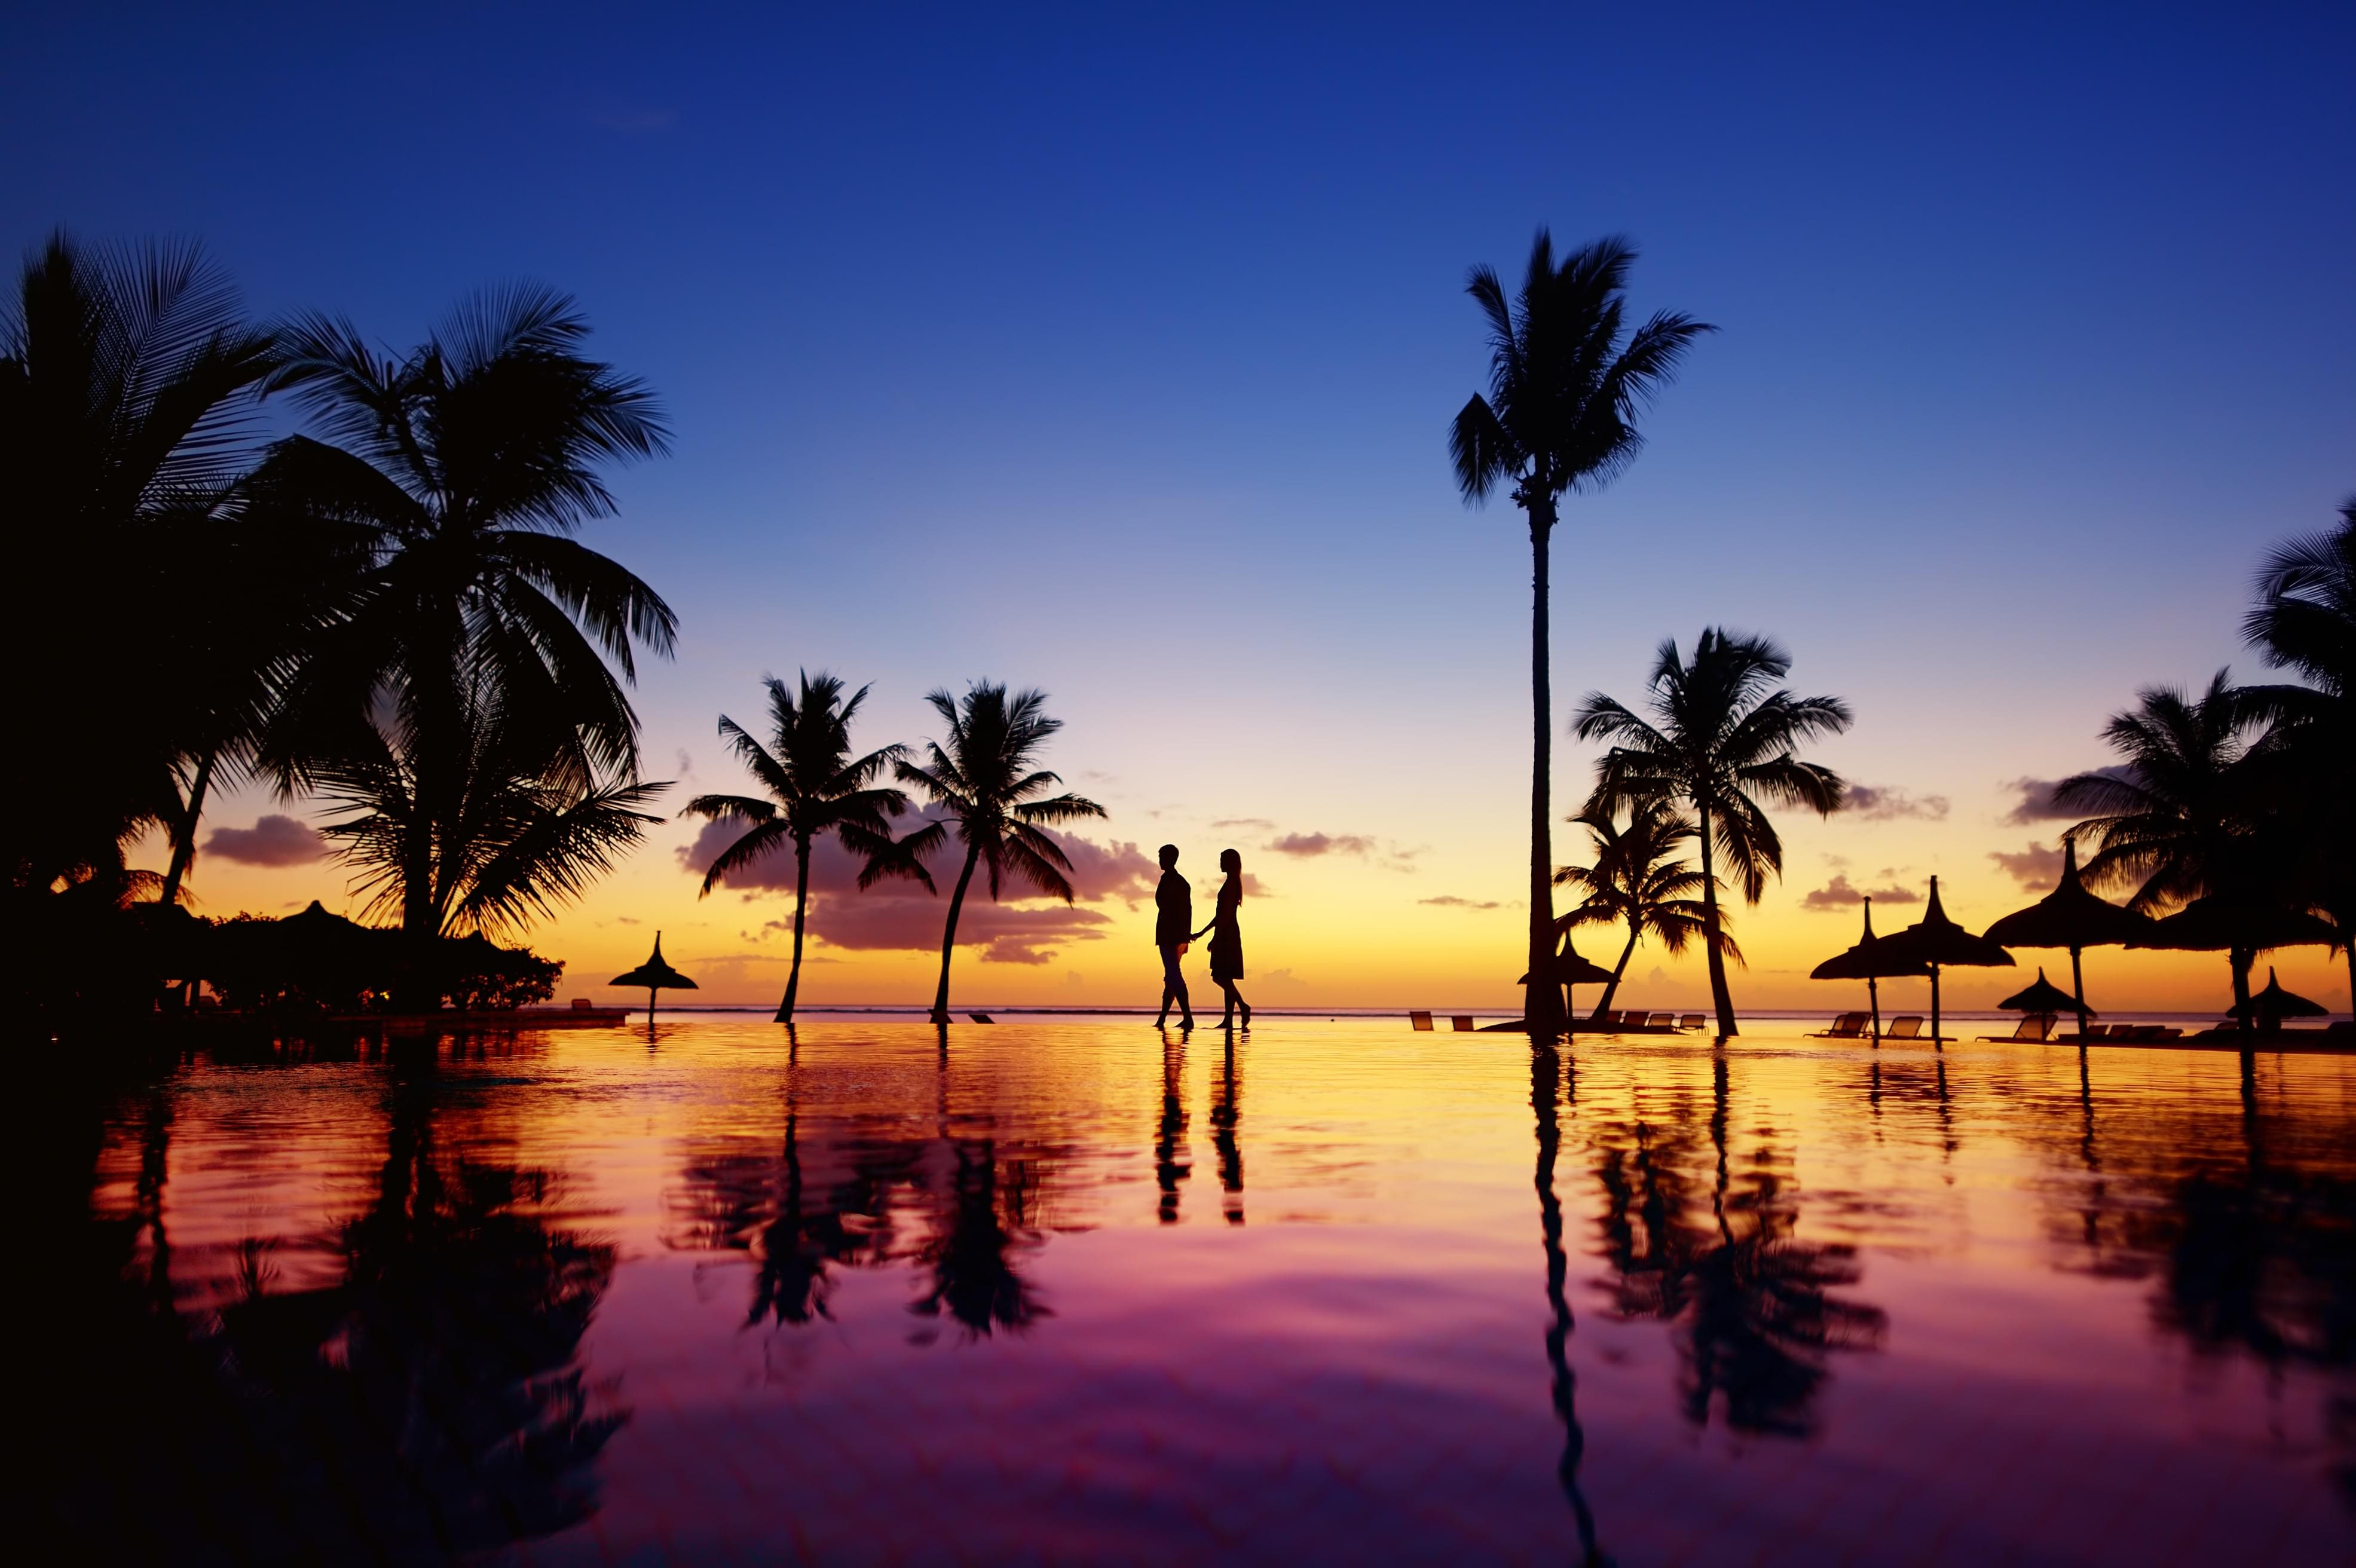 Stroll around mesmerizing beaches of Mauritius with your loved one!